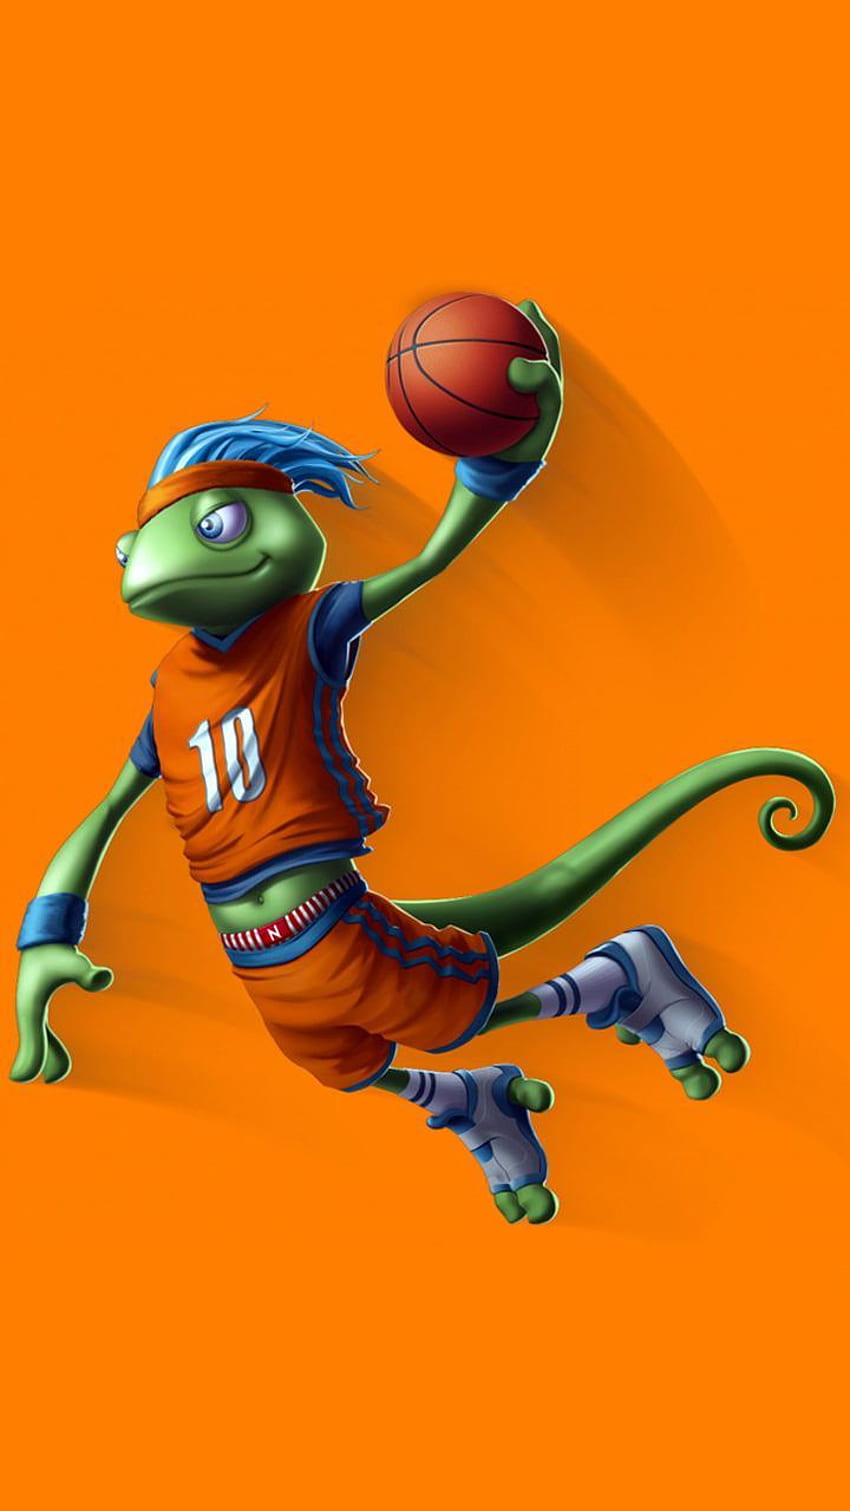 BasketBall ( Ultra ) for Android, Basketball Scenery HD phone wallpaper